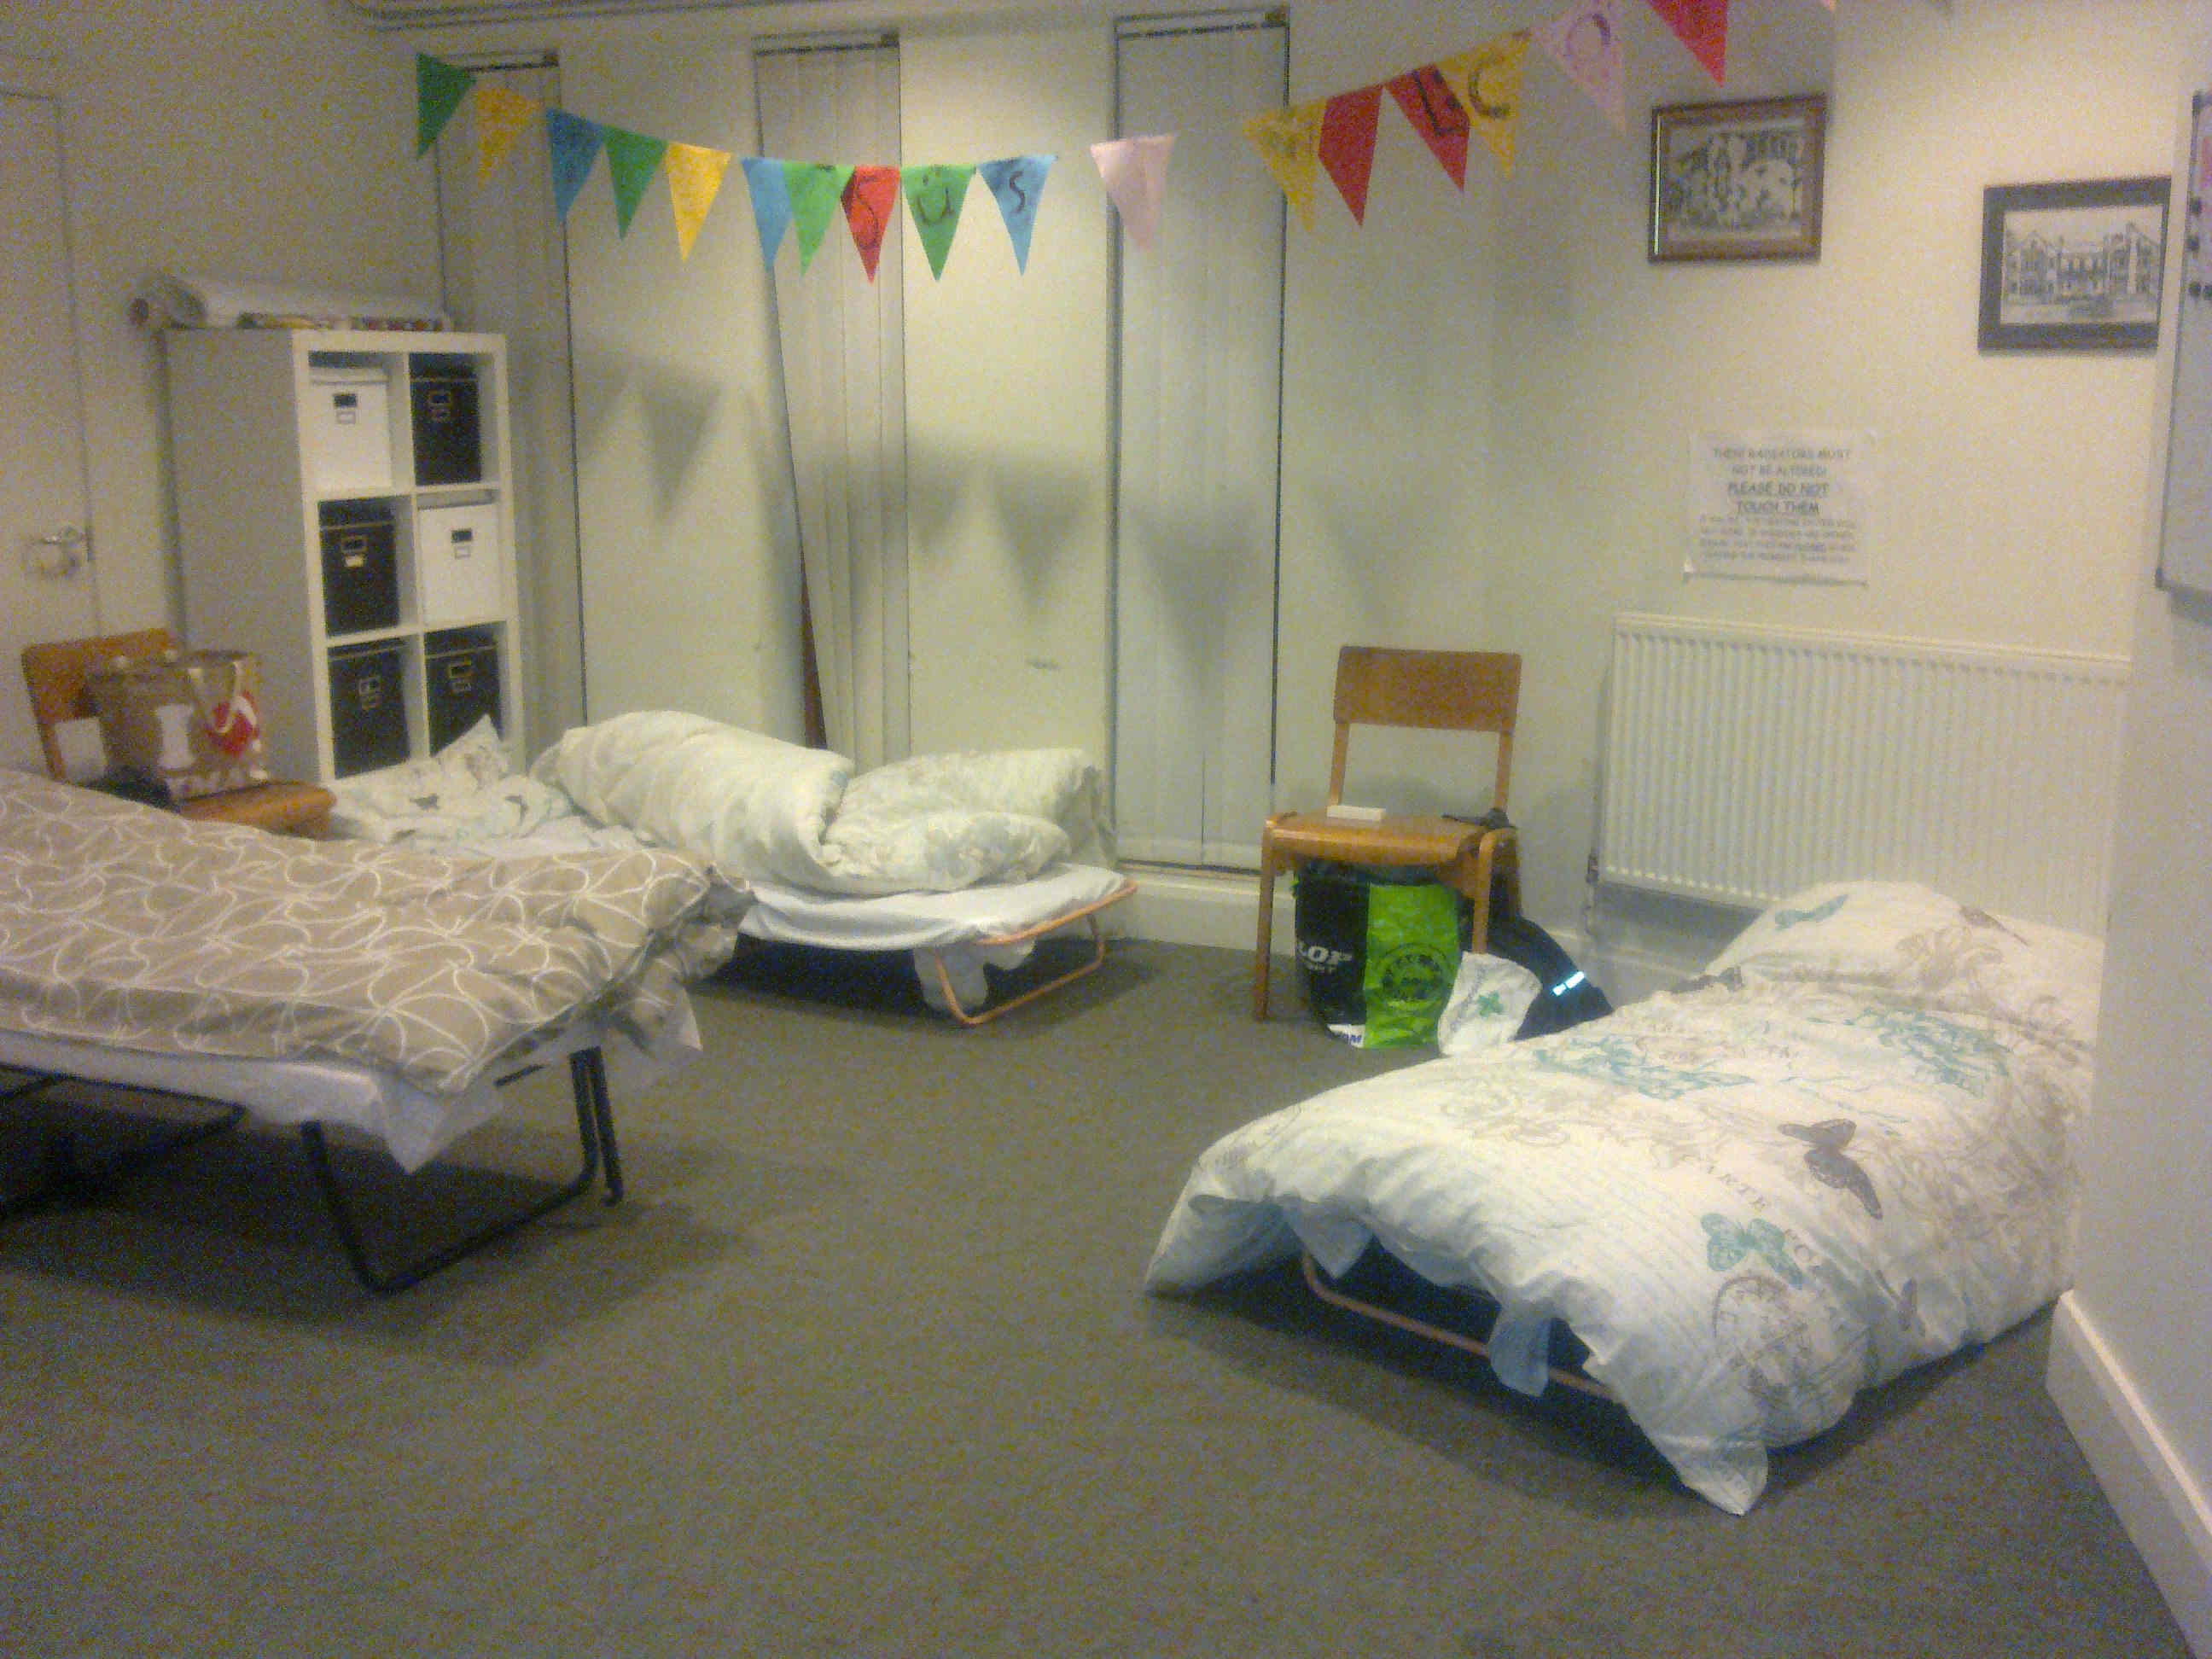 Empty beds for the guests